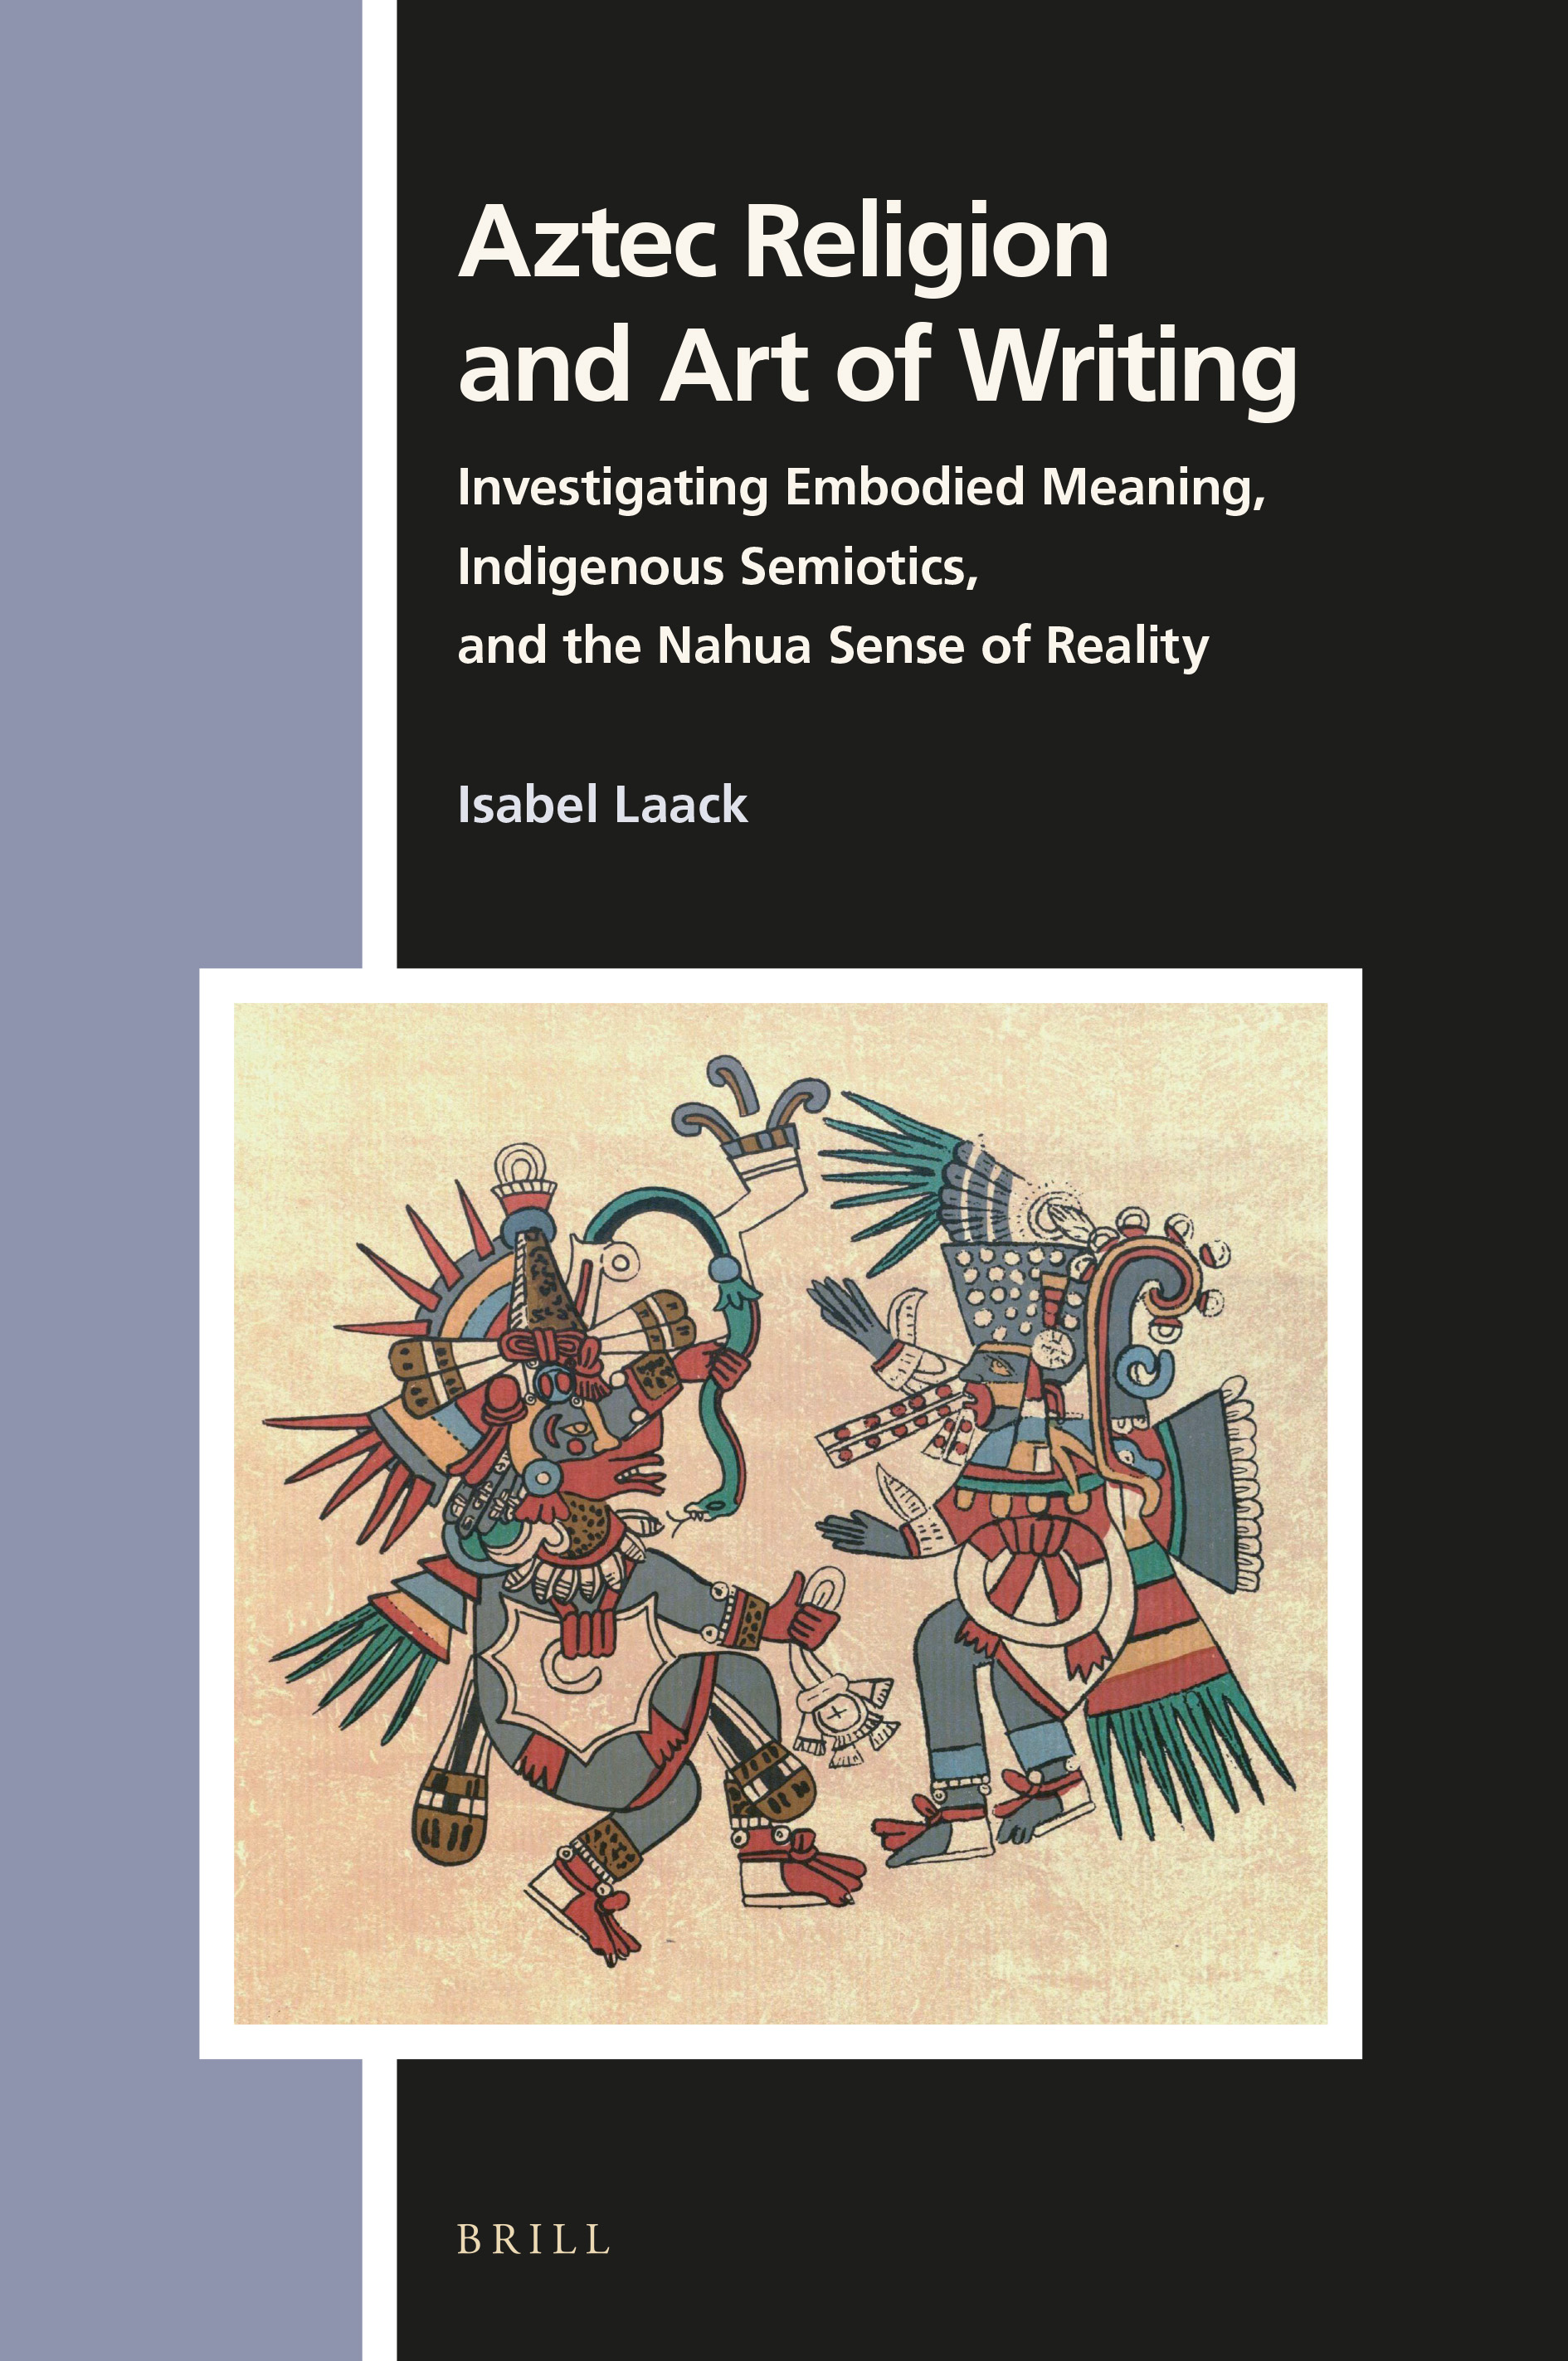 Book Cover of Aztec Religion and the Art of Writing